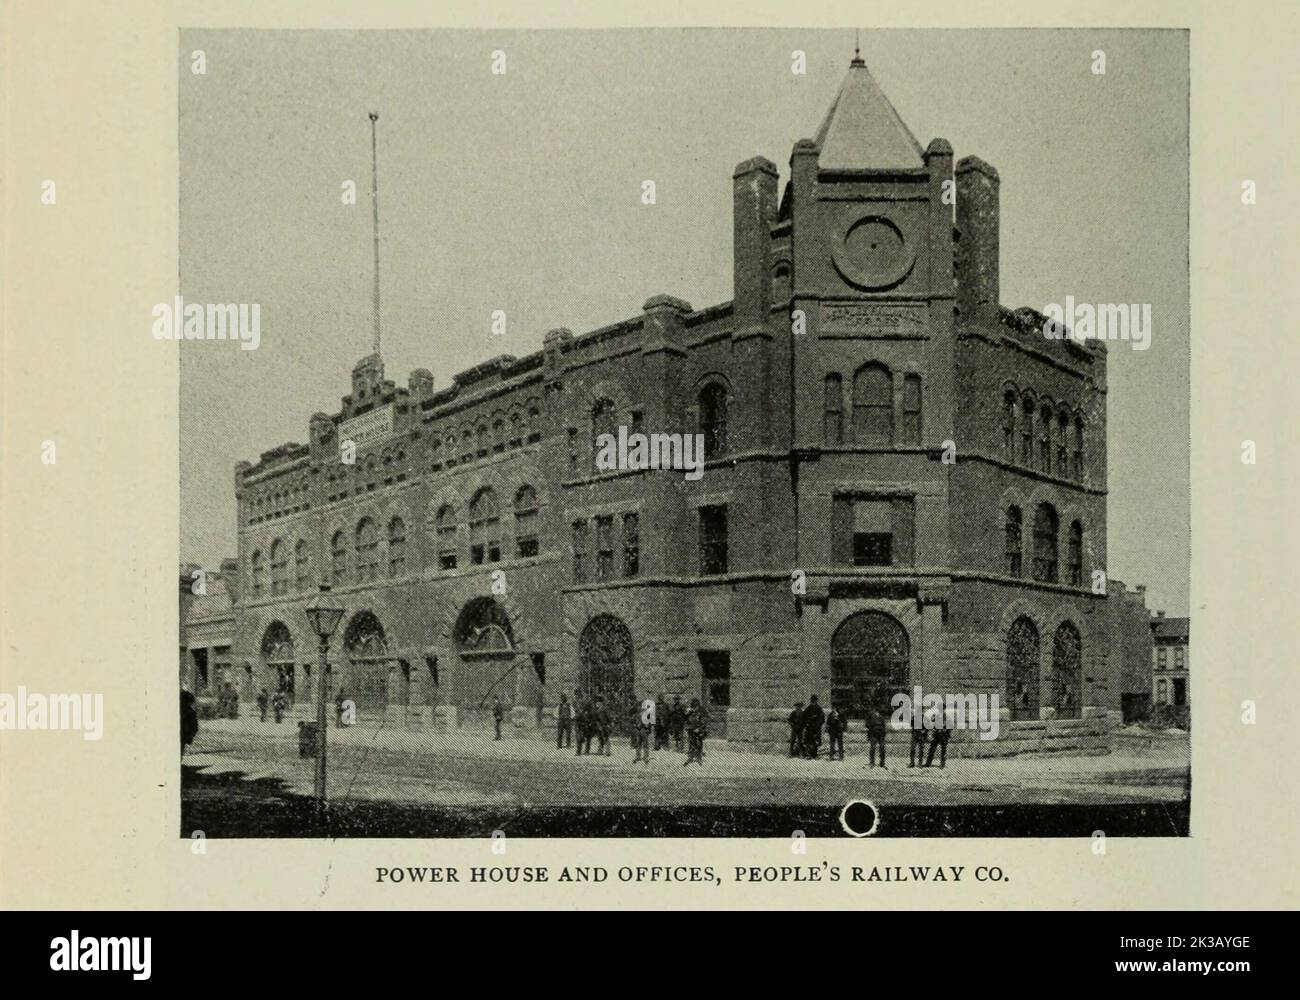 Powerhouse and Offices, People's Railway Co.from the Article THE STREET RAILWAYS OF ST. LOUIS, Missouri By William H. Bryan, M. E. from The Engineering Magazine DEVOTED TO INDUSTRIAL PROGRESS Volume VIII April to September, 1895 NEW YORK The Engineering Magazine Co Stock Photo